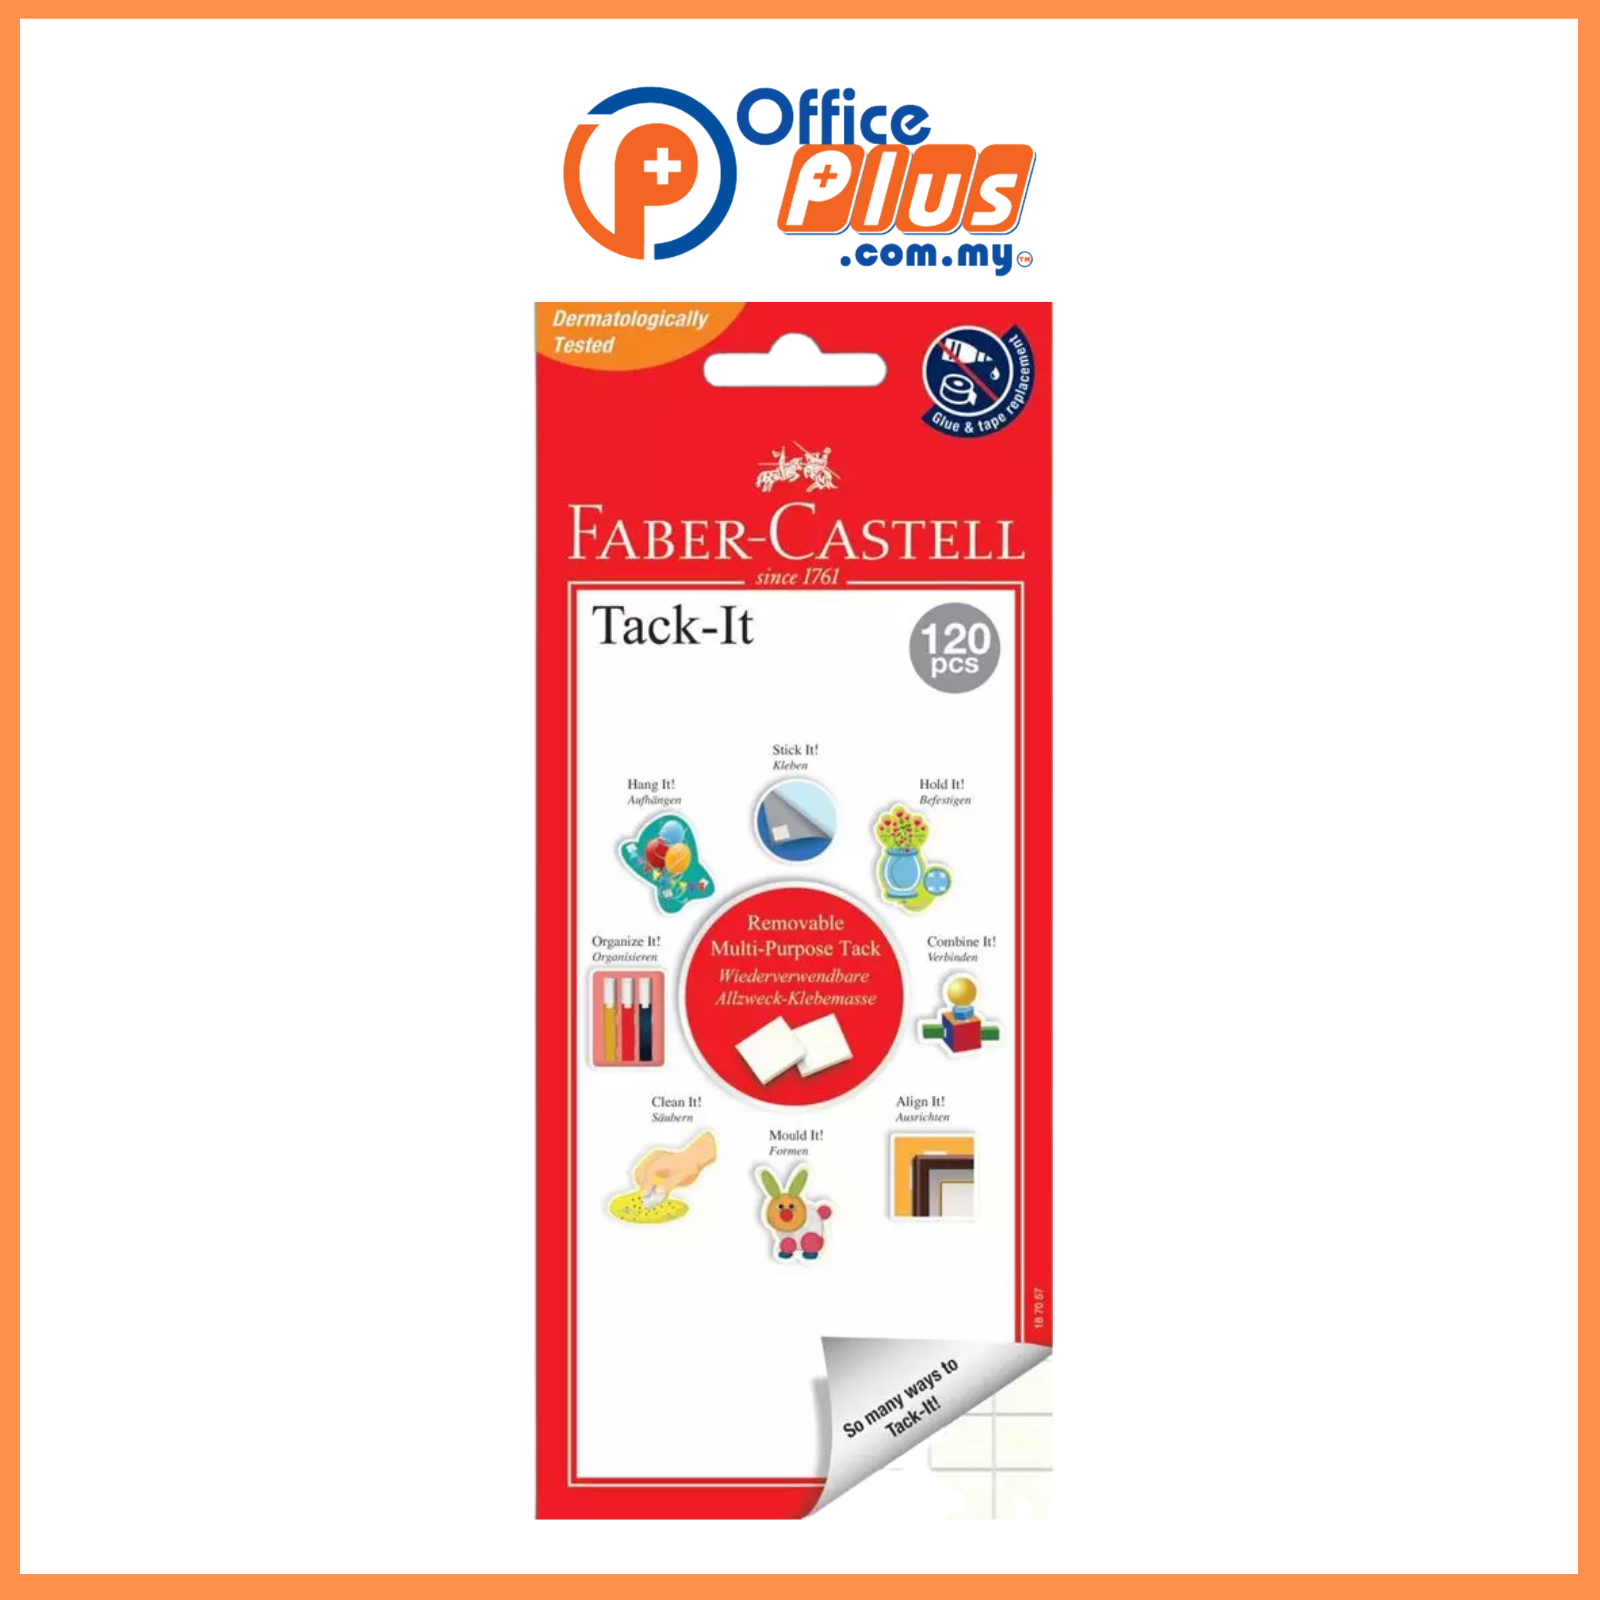 Faber-Castell Removable Adhesive Tack It 75g (187057) - OfficePlus